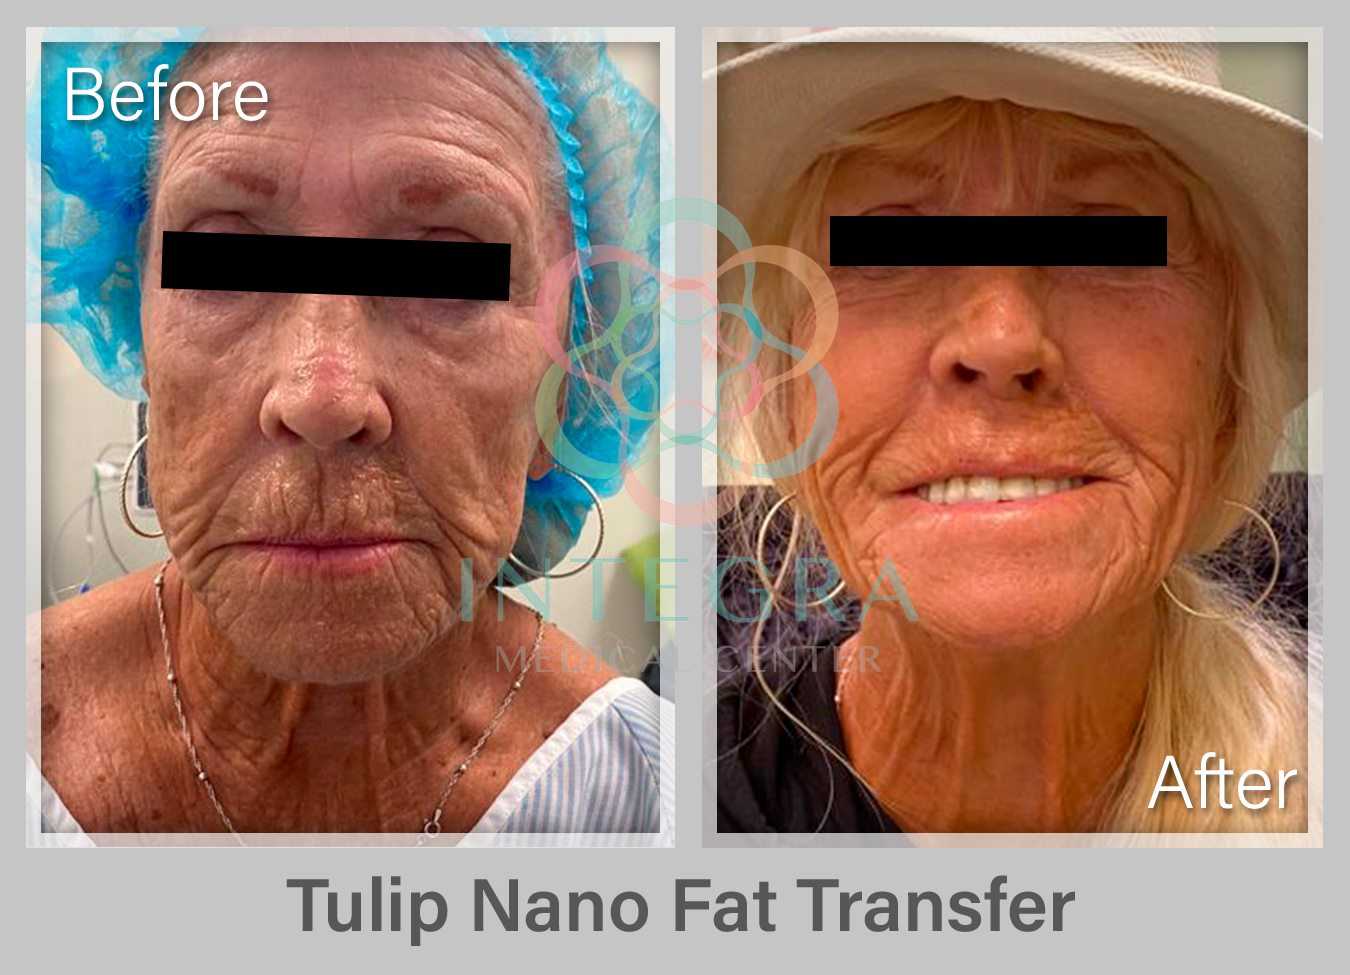 Before After - Tulip Nano Fat Transfer